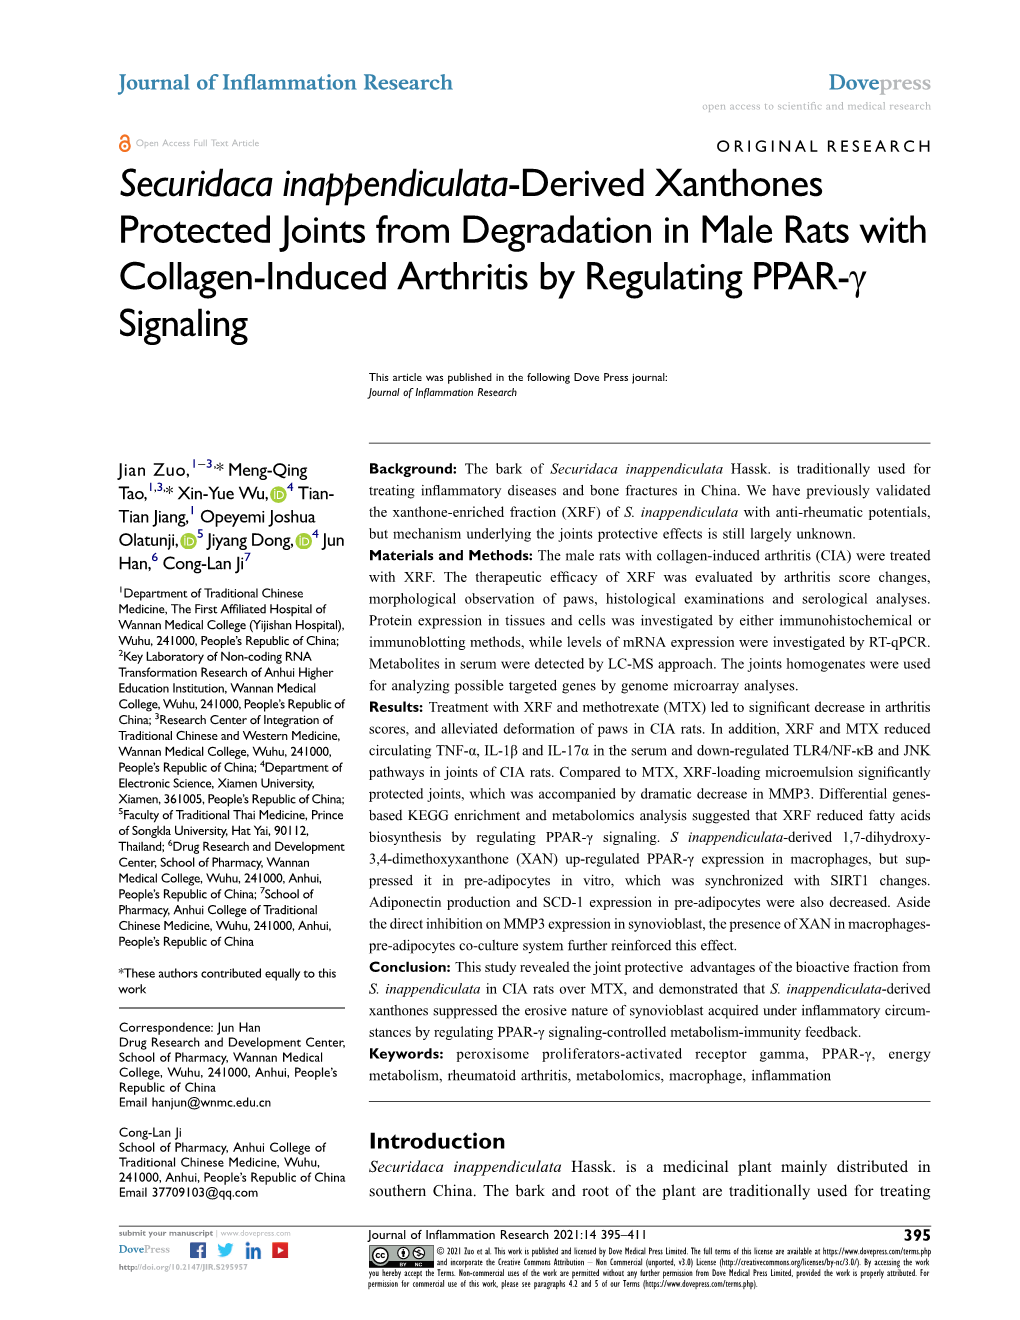 Securidaca Inappendiculata-Derived Xanthones Protected Joints from Degradation in Male Rats with Collagen-Induced Arthritis by Regulating PPAR-Γ Signaling